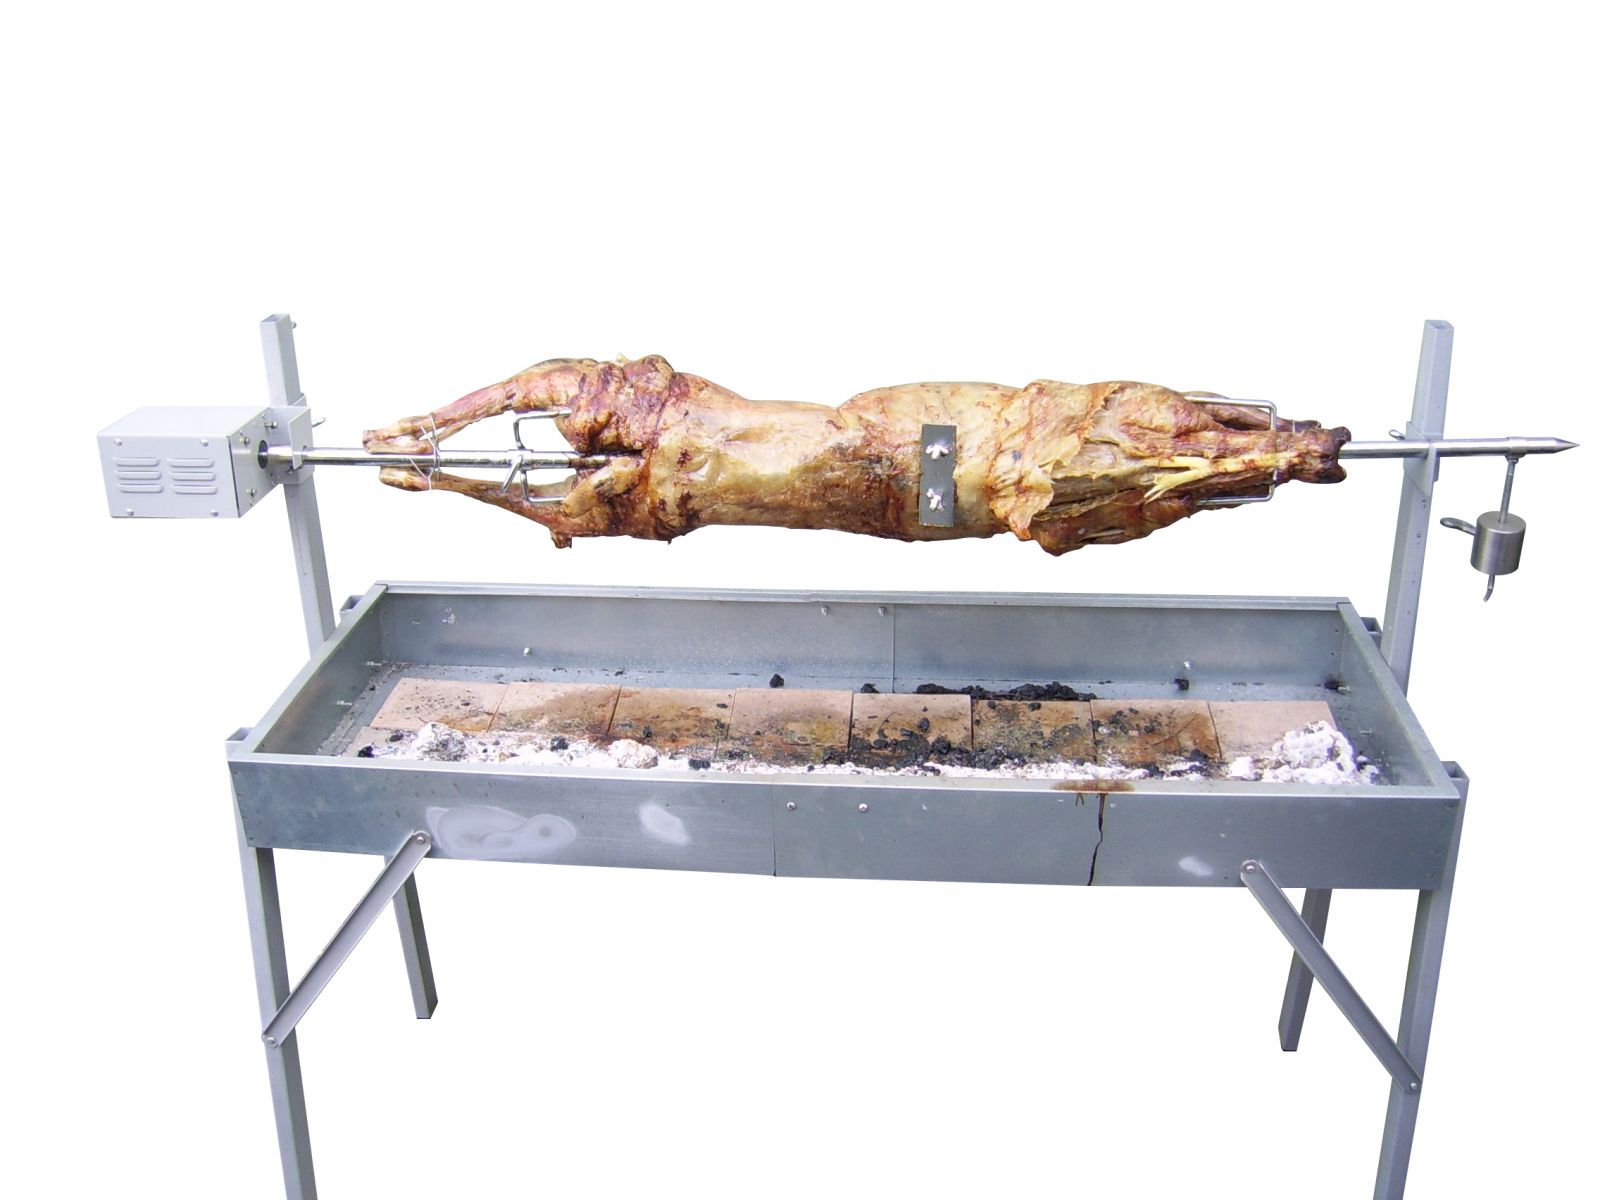 How to Balance a Lamb on a Spit Roaster - This image shows a perfectly balanced lamb on the spit